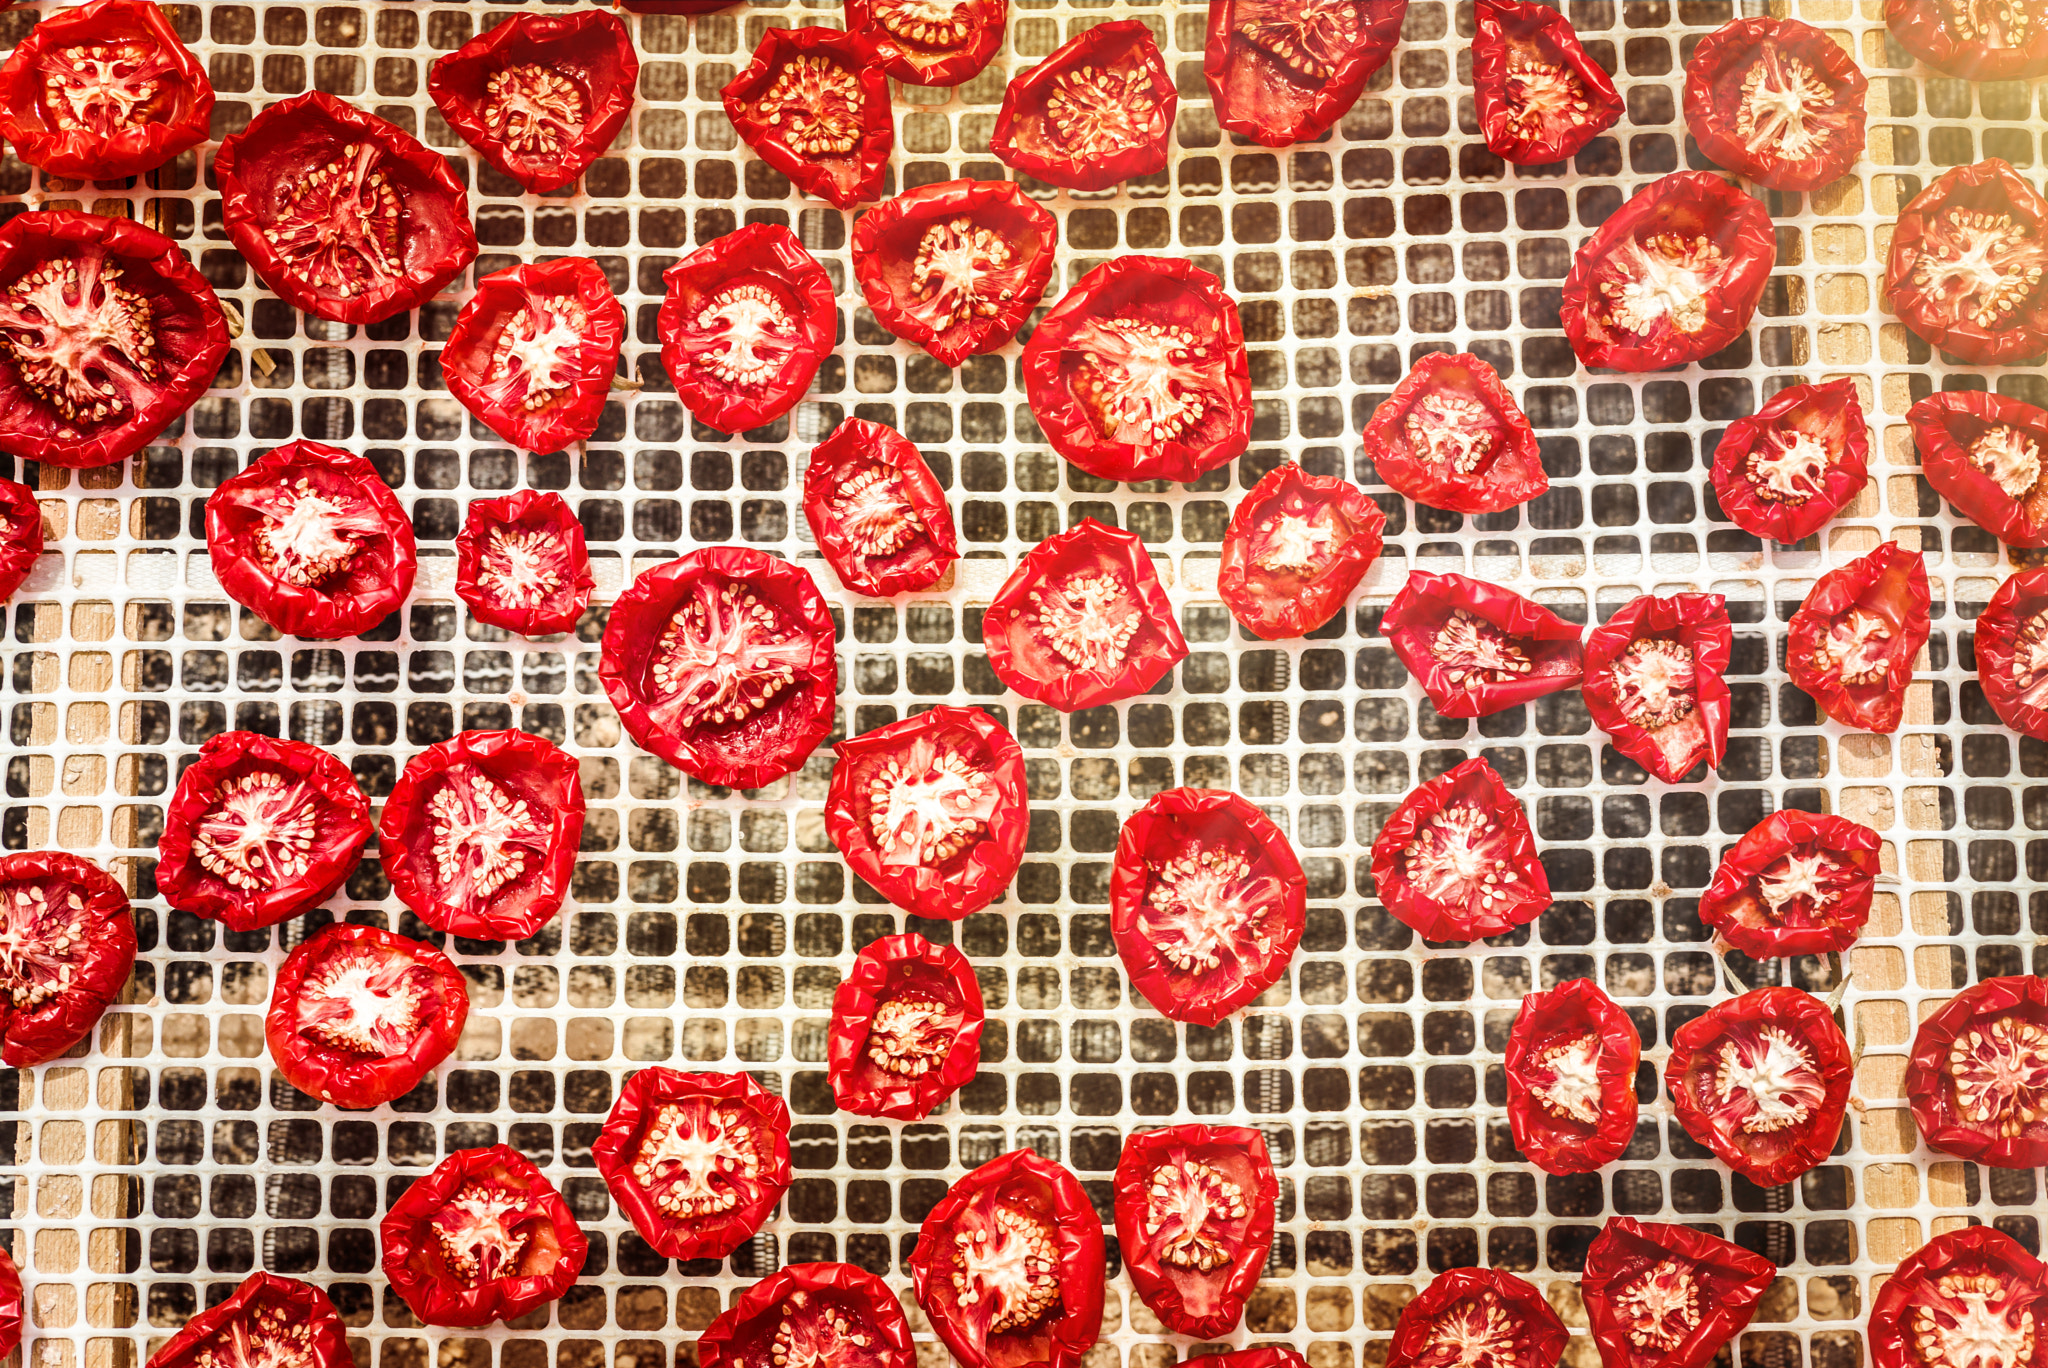 Summicron 1:2/50 Leitz sample photo. Sun dried tomatoes in sicily photography